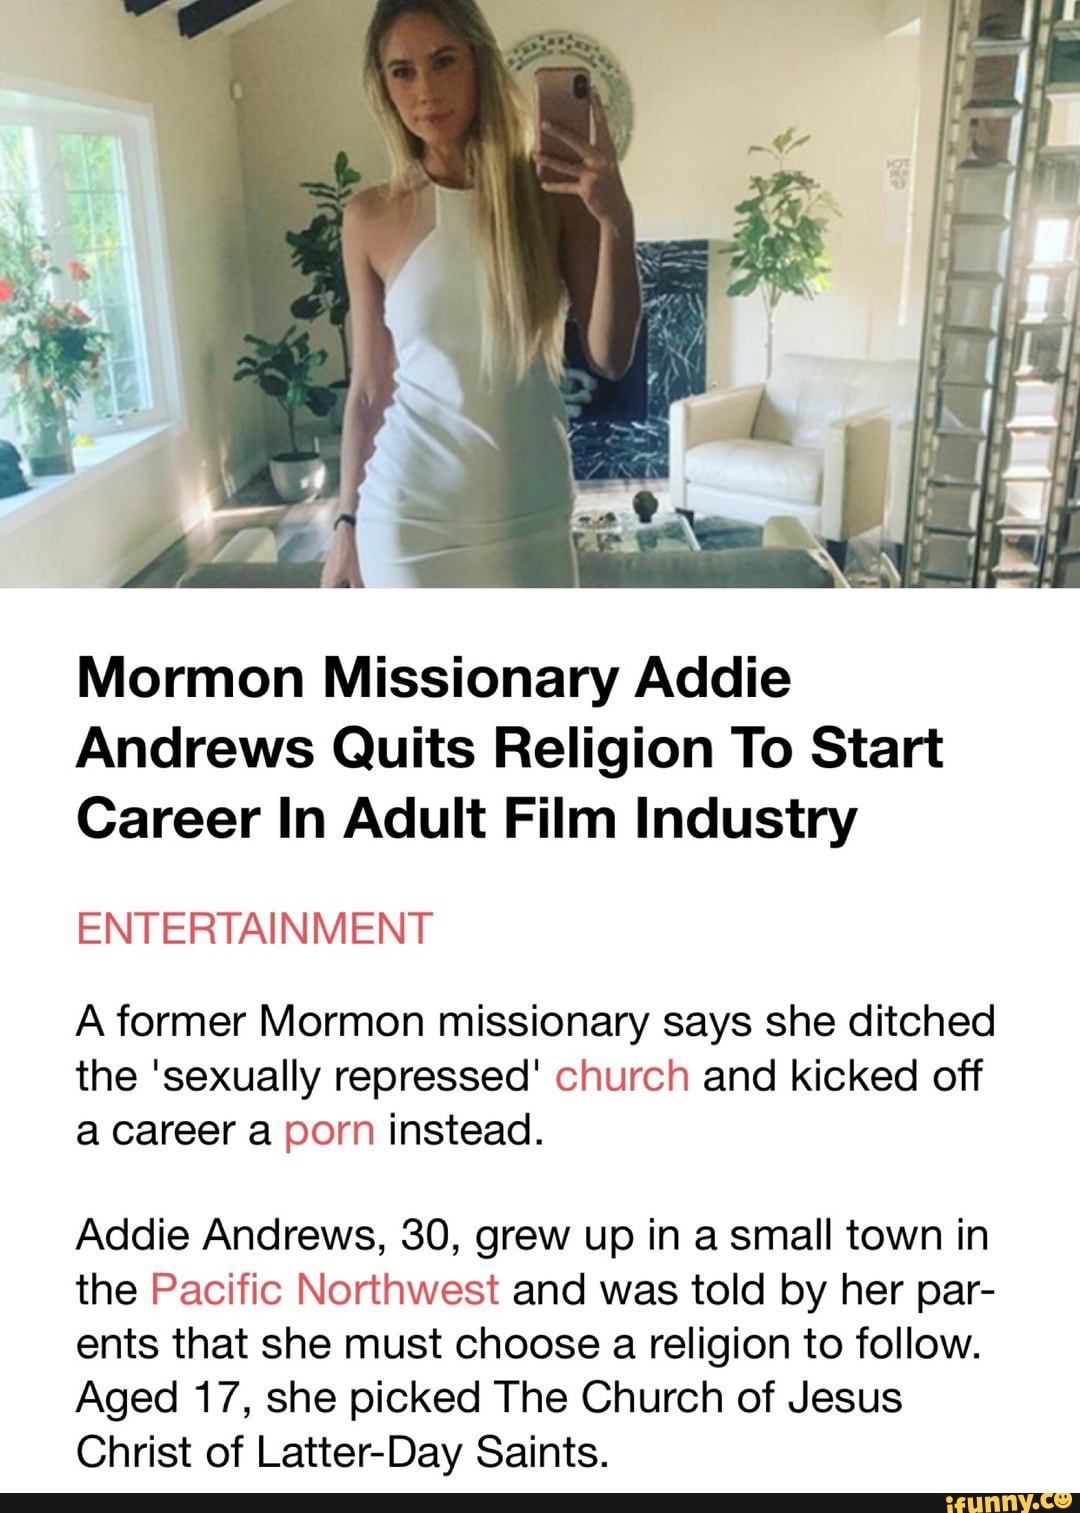 Mormon Missionary Addie Andrews Quits Religion To Start Career In Adult Film Industry